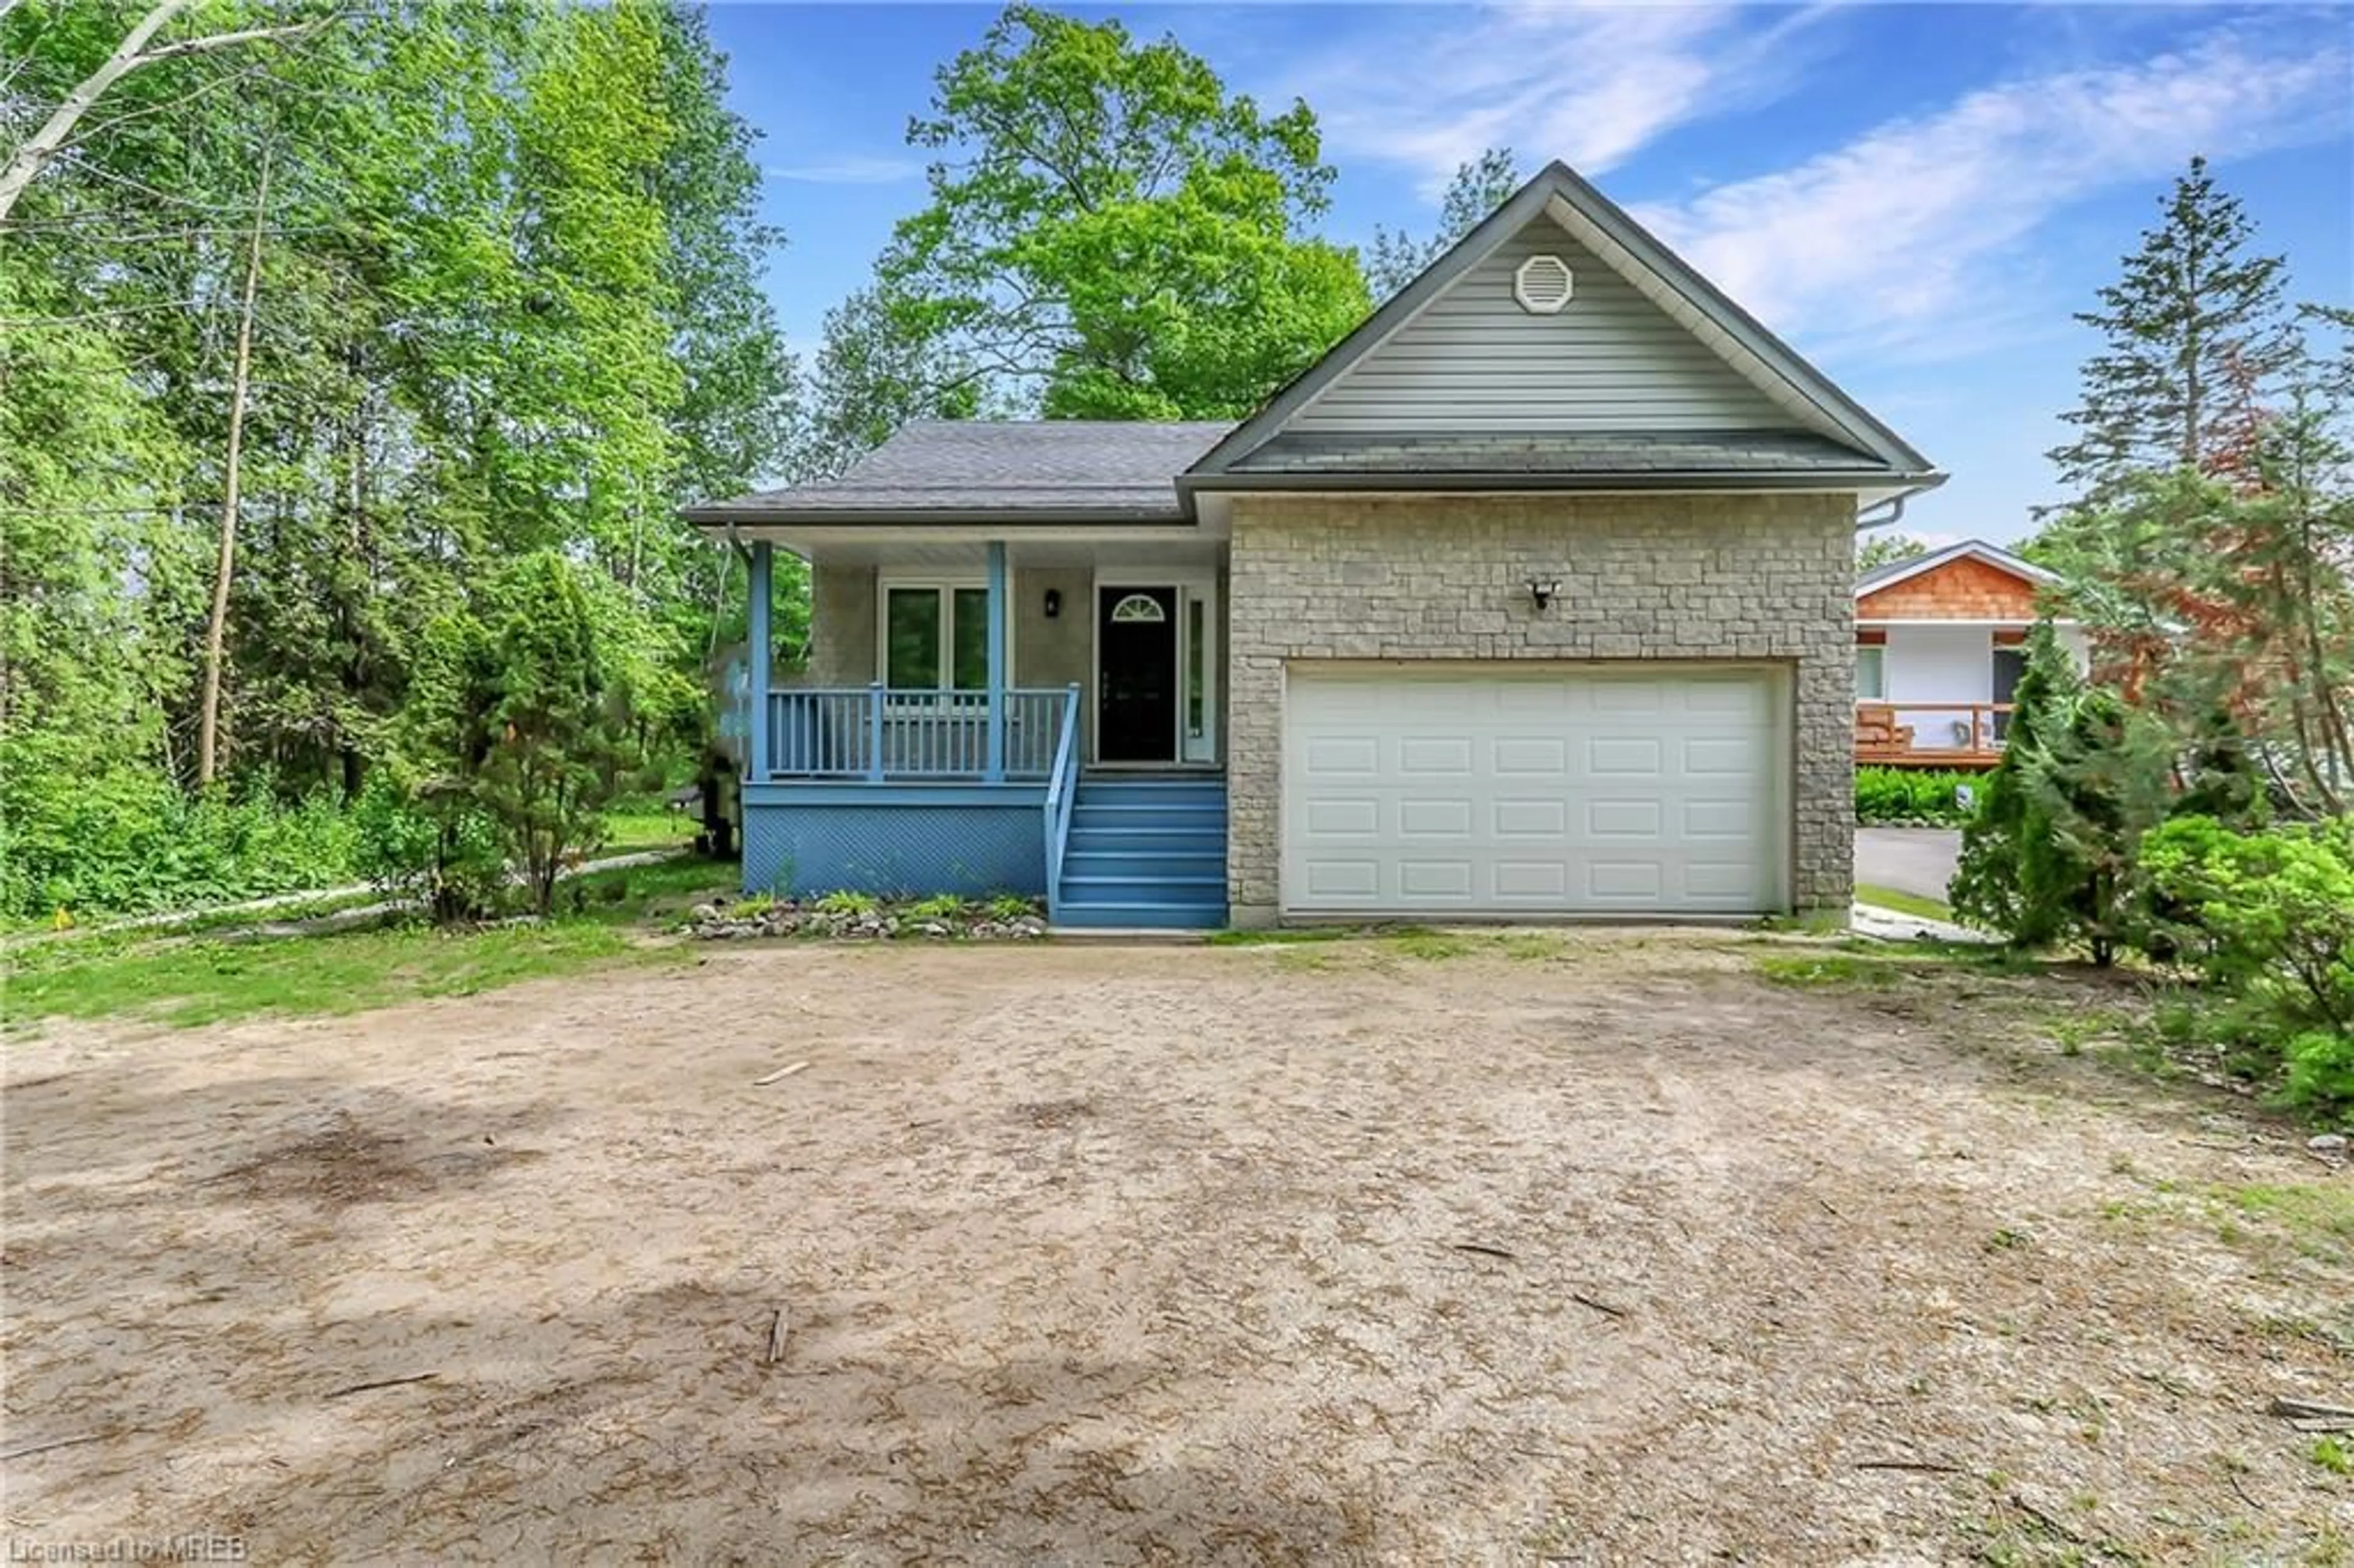 Cottage for 1463 River Rd, Wasaga Beach Ontario L9Z 2W5